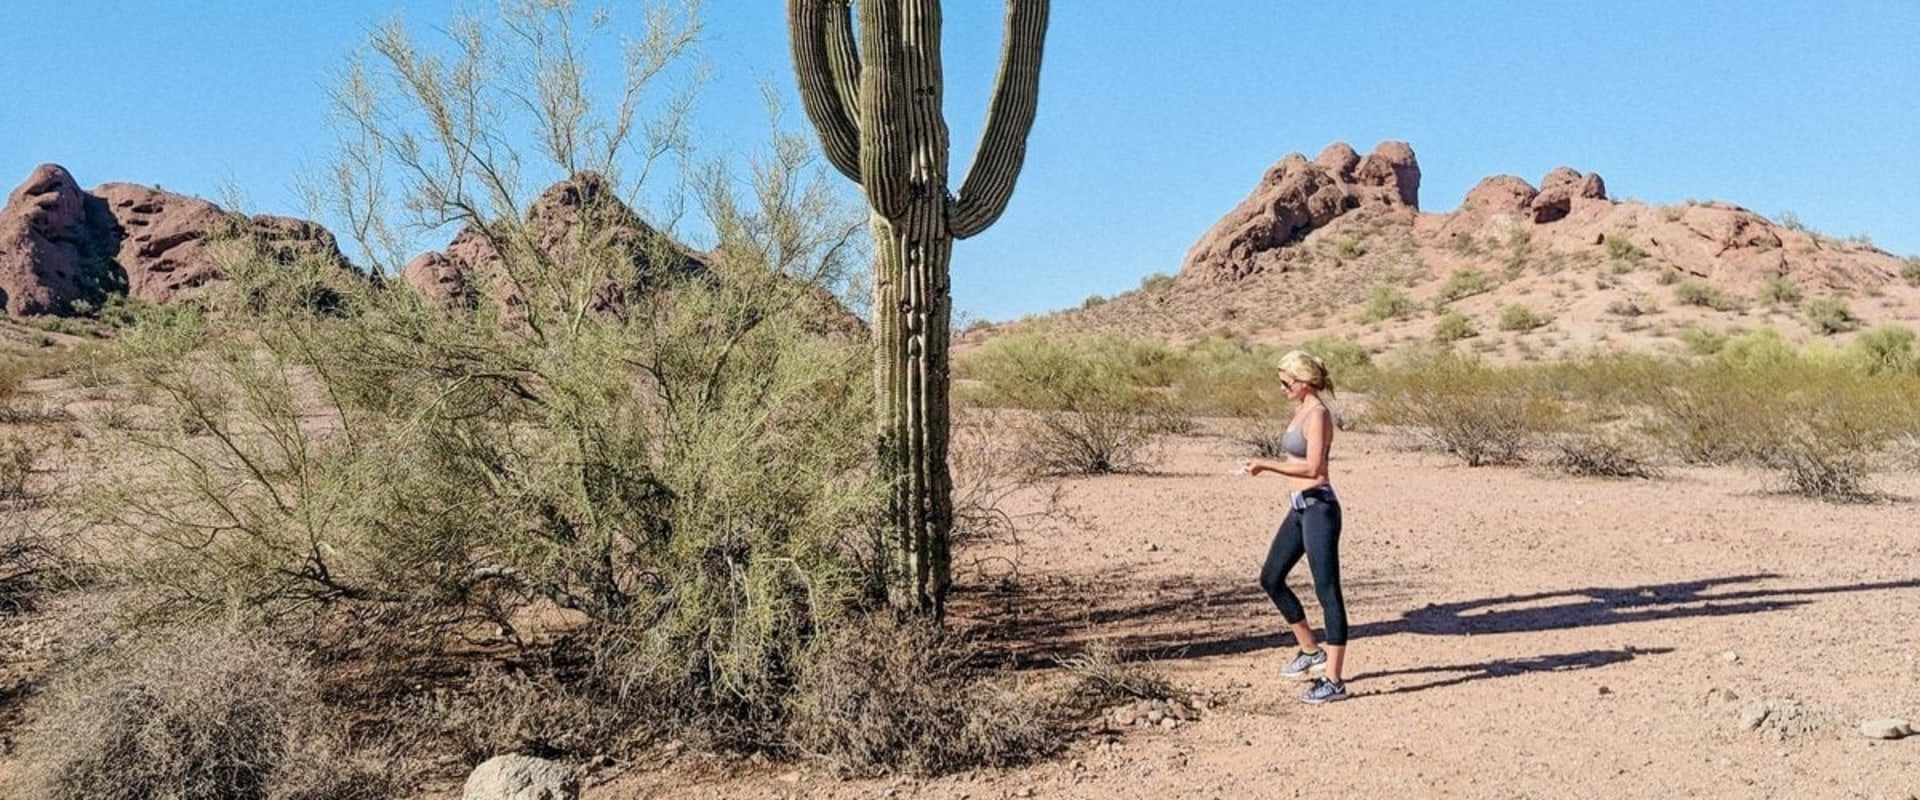 Discovering Scottsdale, Arizona: A Guide for Millennial Travelers